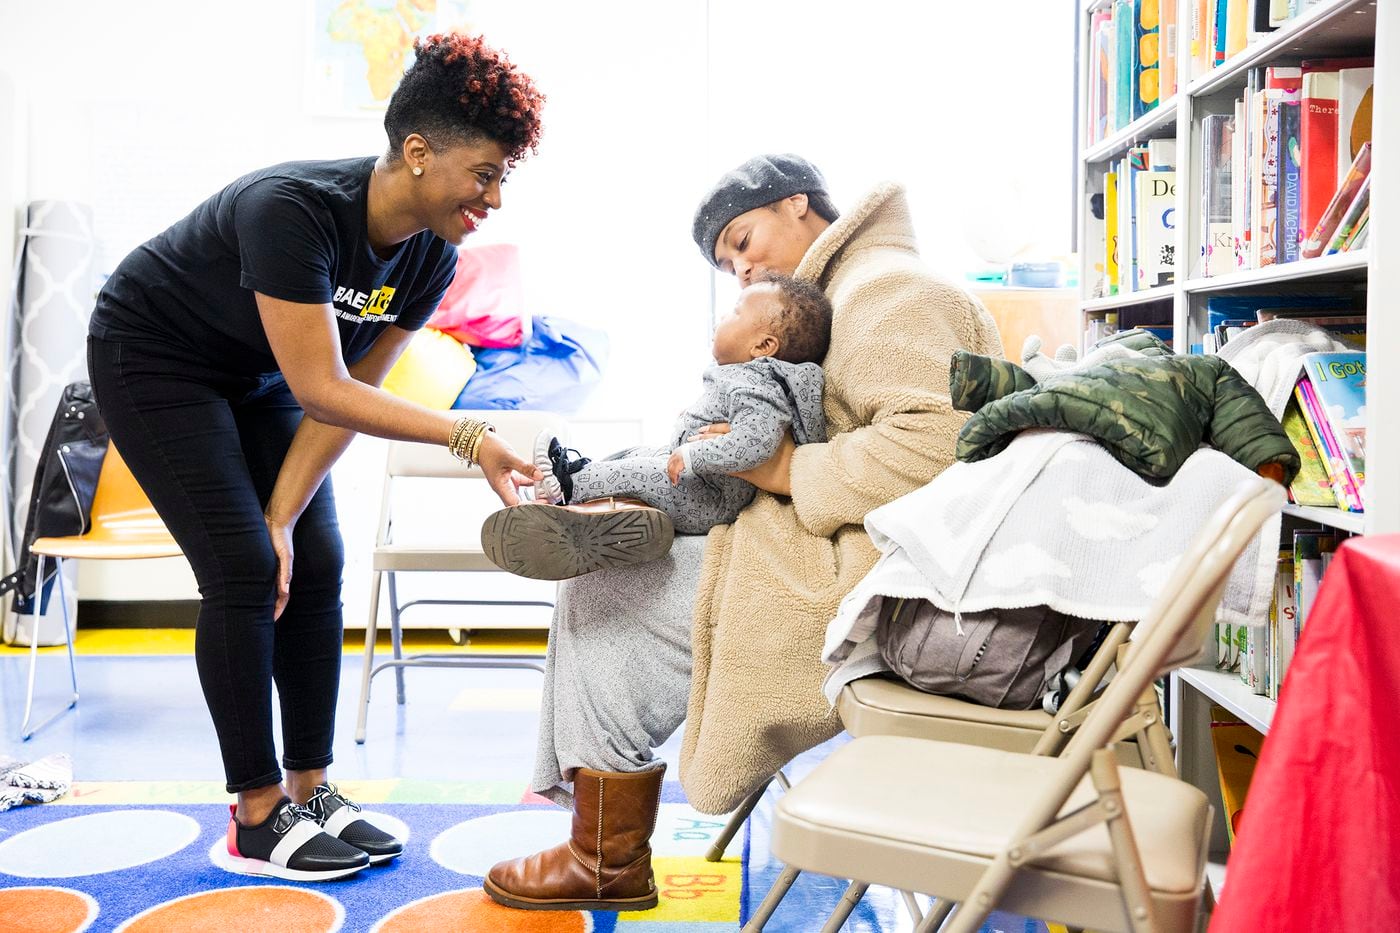 Jabina Coleman (left) is a lactation consultant and co-founder of the nonprofit Perinatal Mental Health Alliance for Women of Color. After experiencing postpartum depression herself, Coleman makes it a point to bring up the topic with new moms.